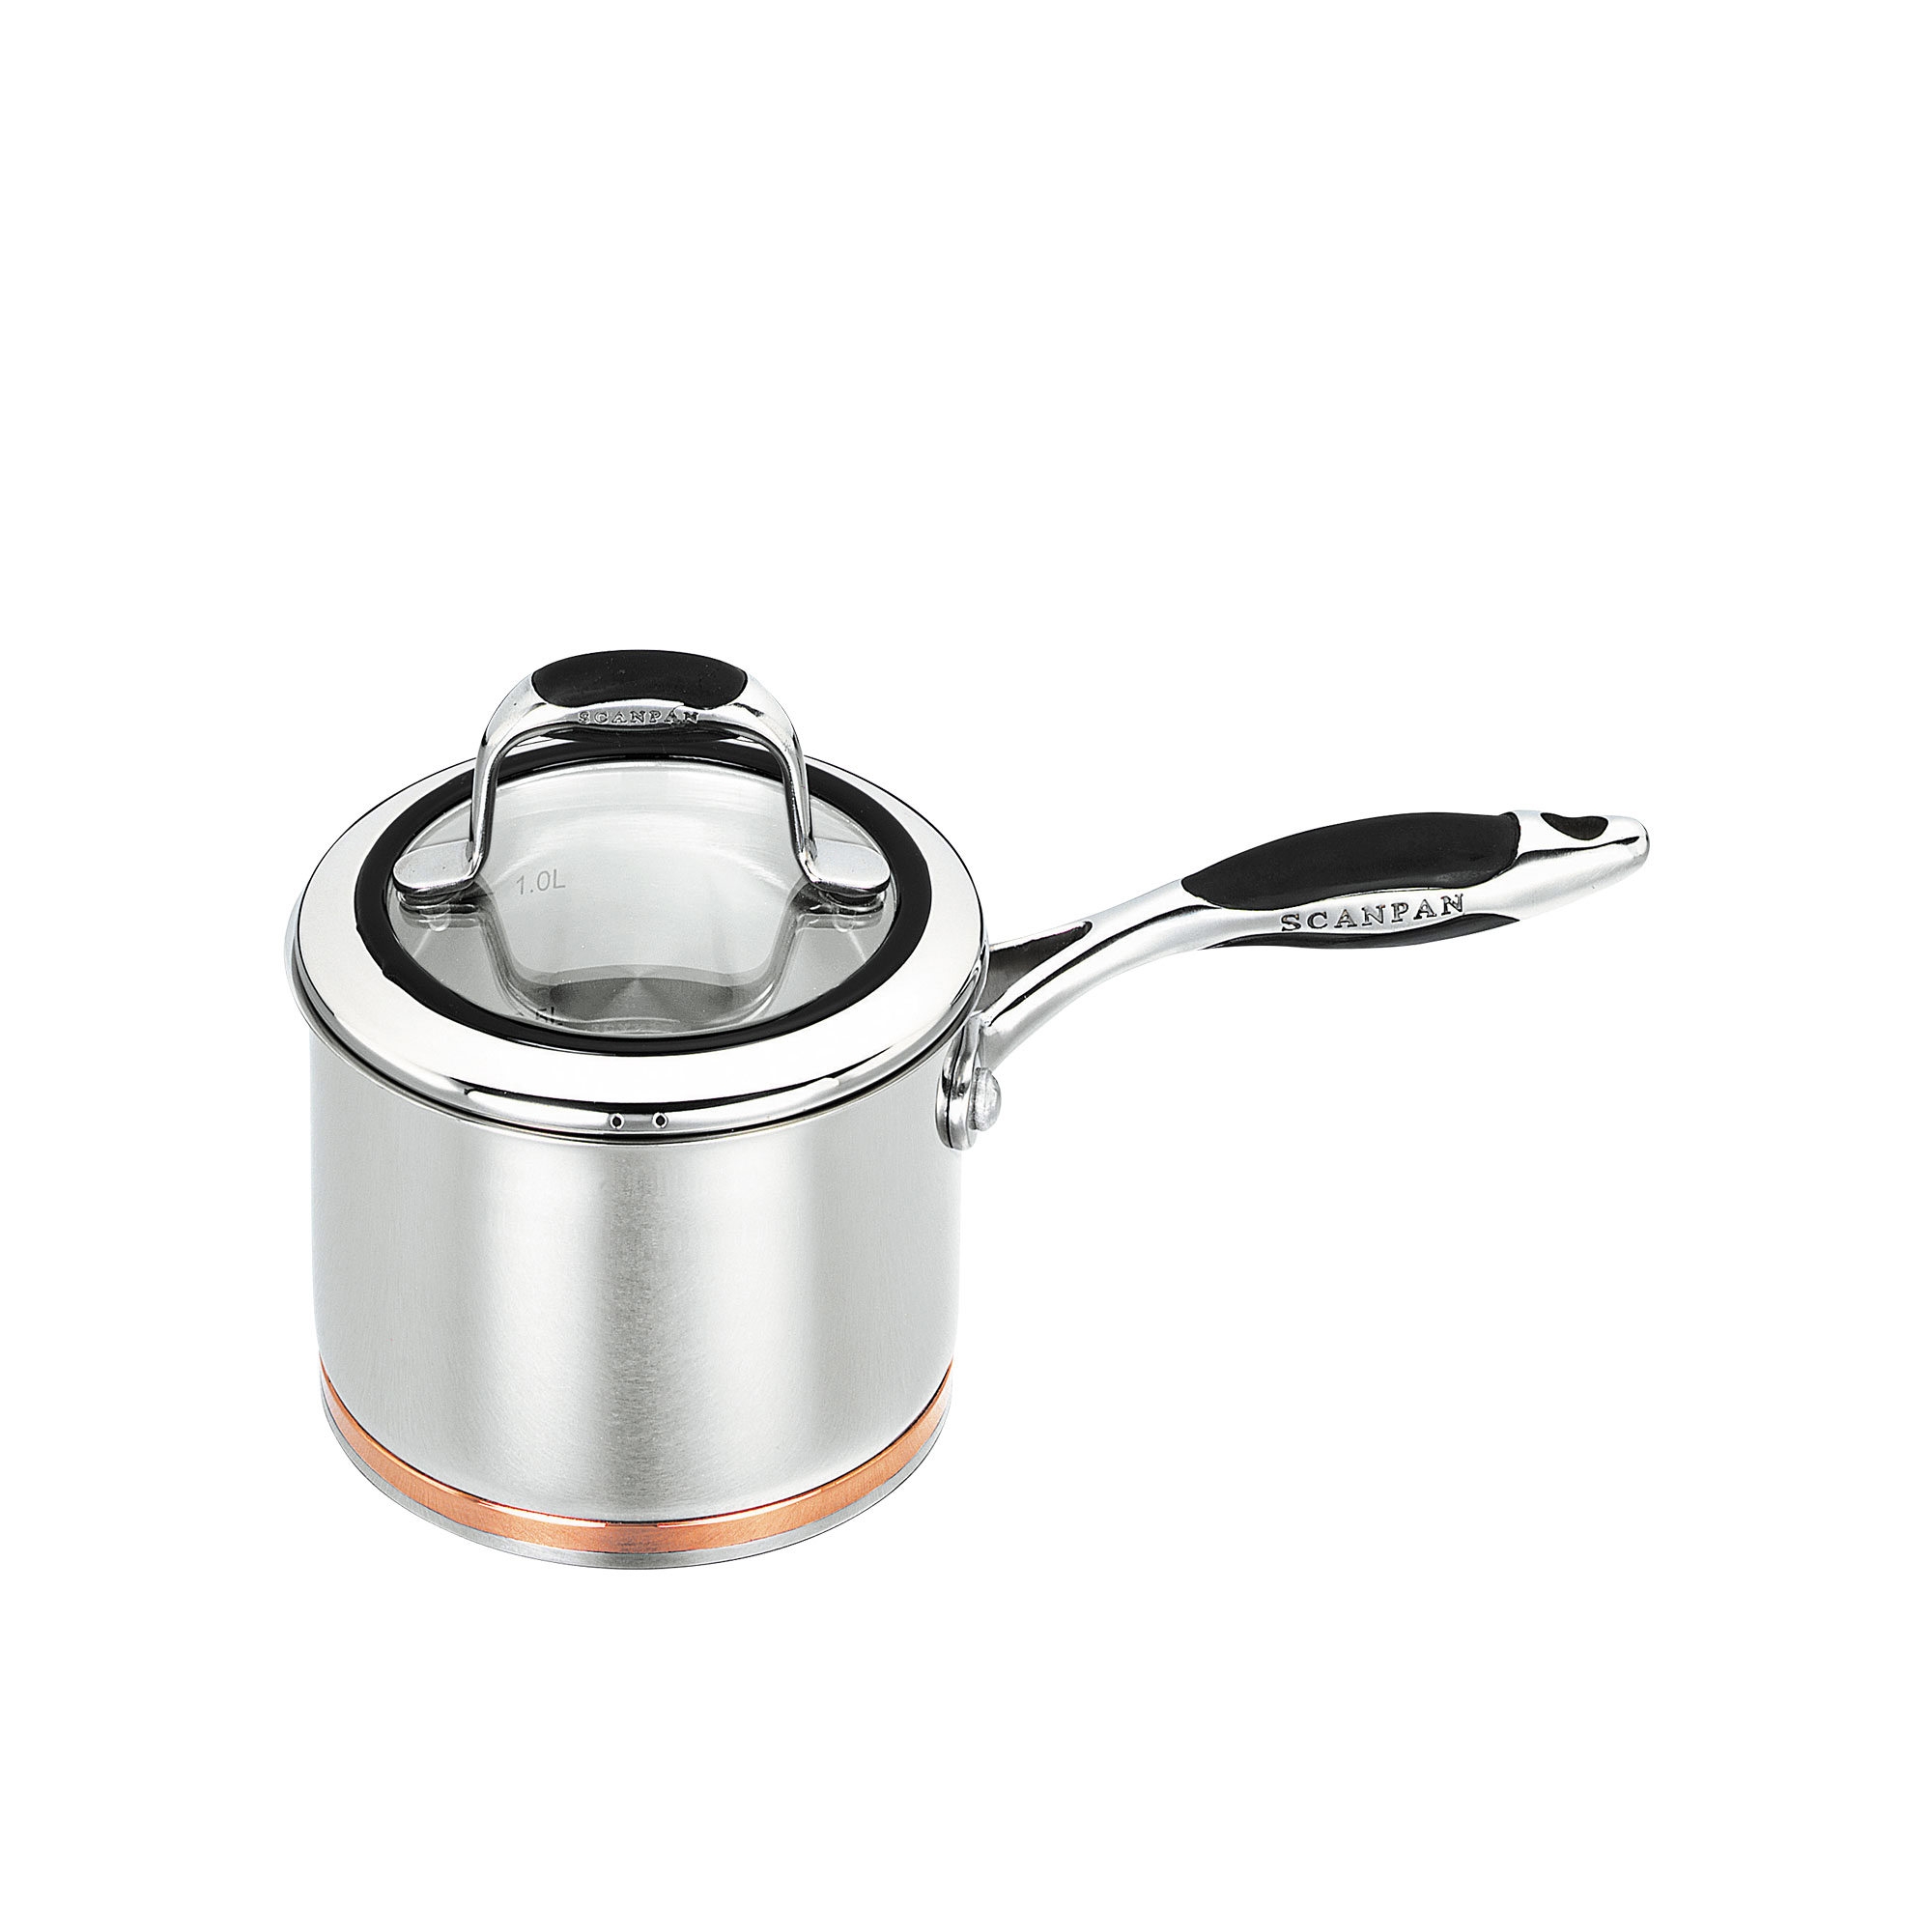 Scanpan Coppernox Stainless Steel Covered Saucepan 14cm - 1.2L Image 1